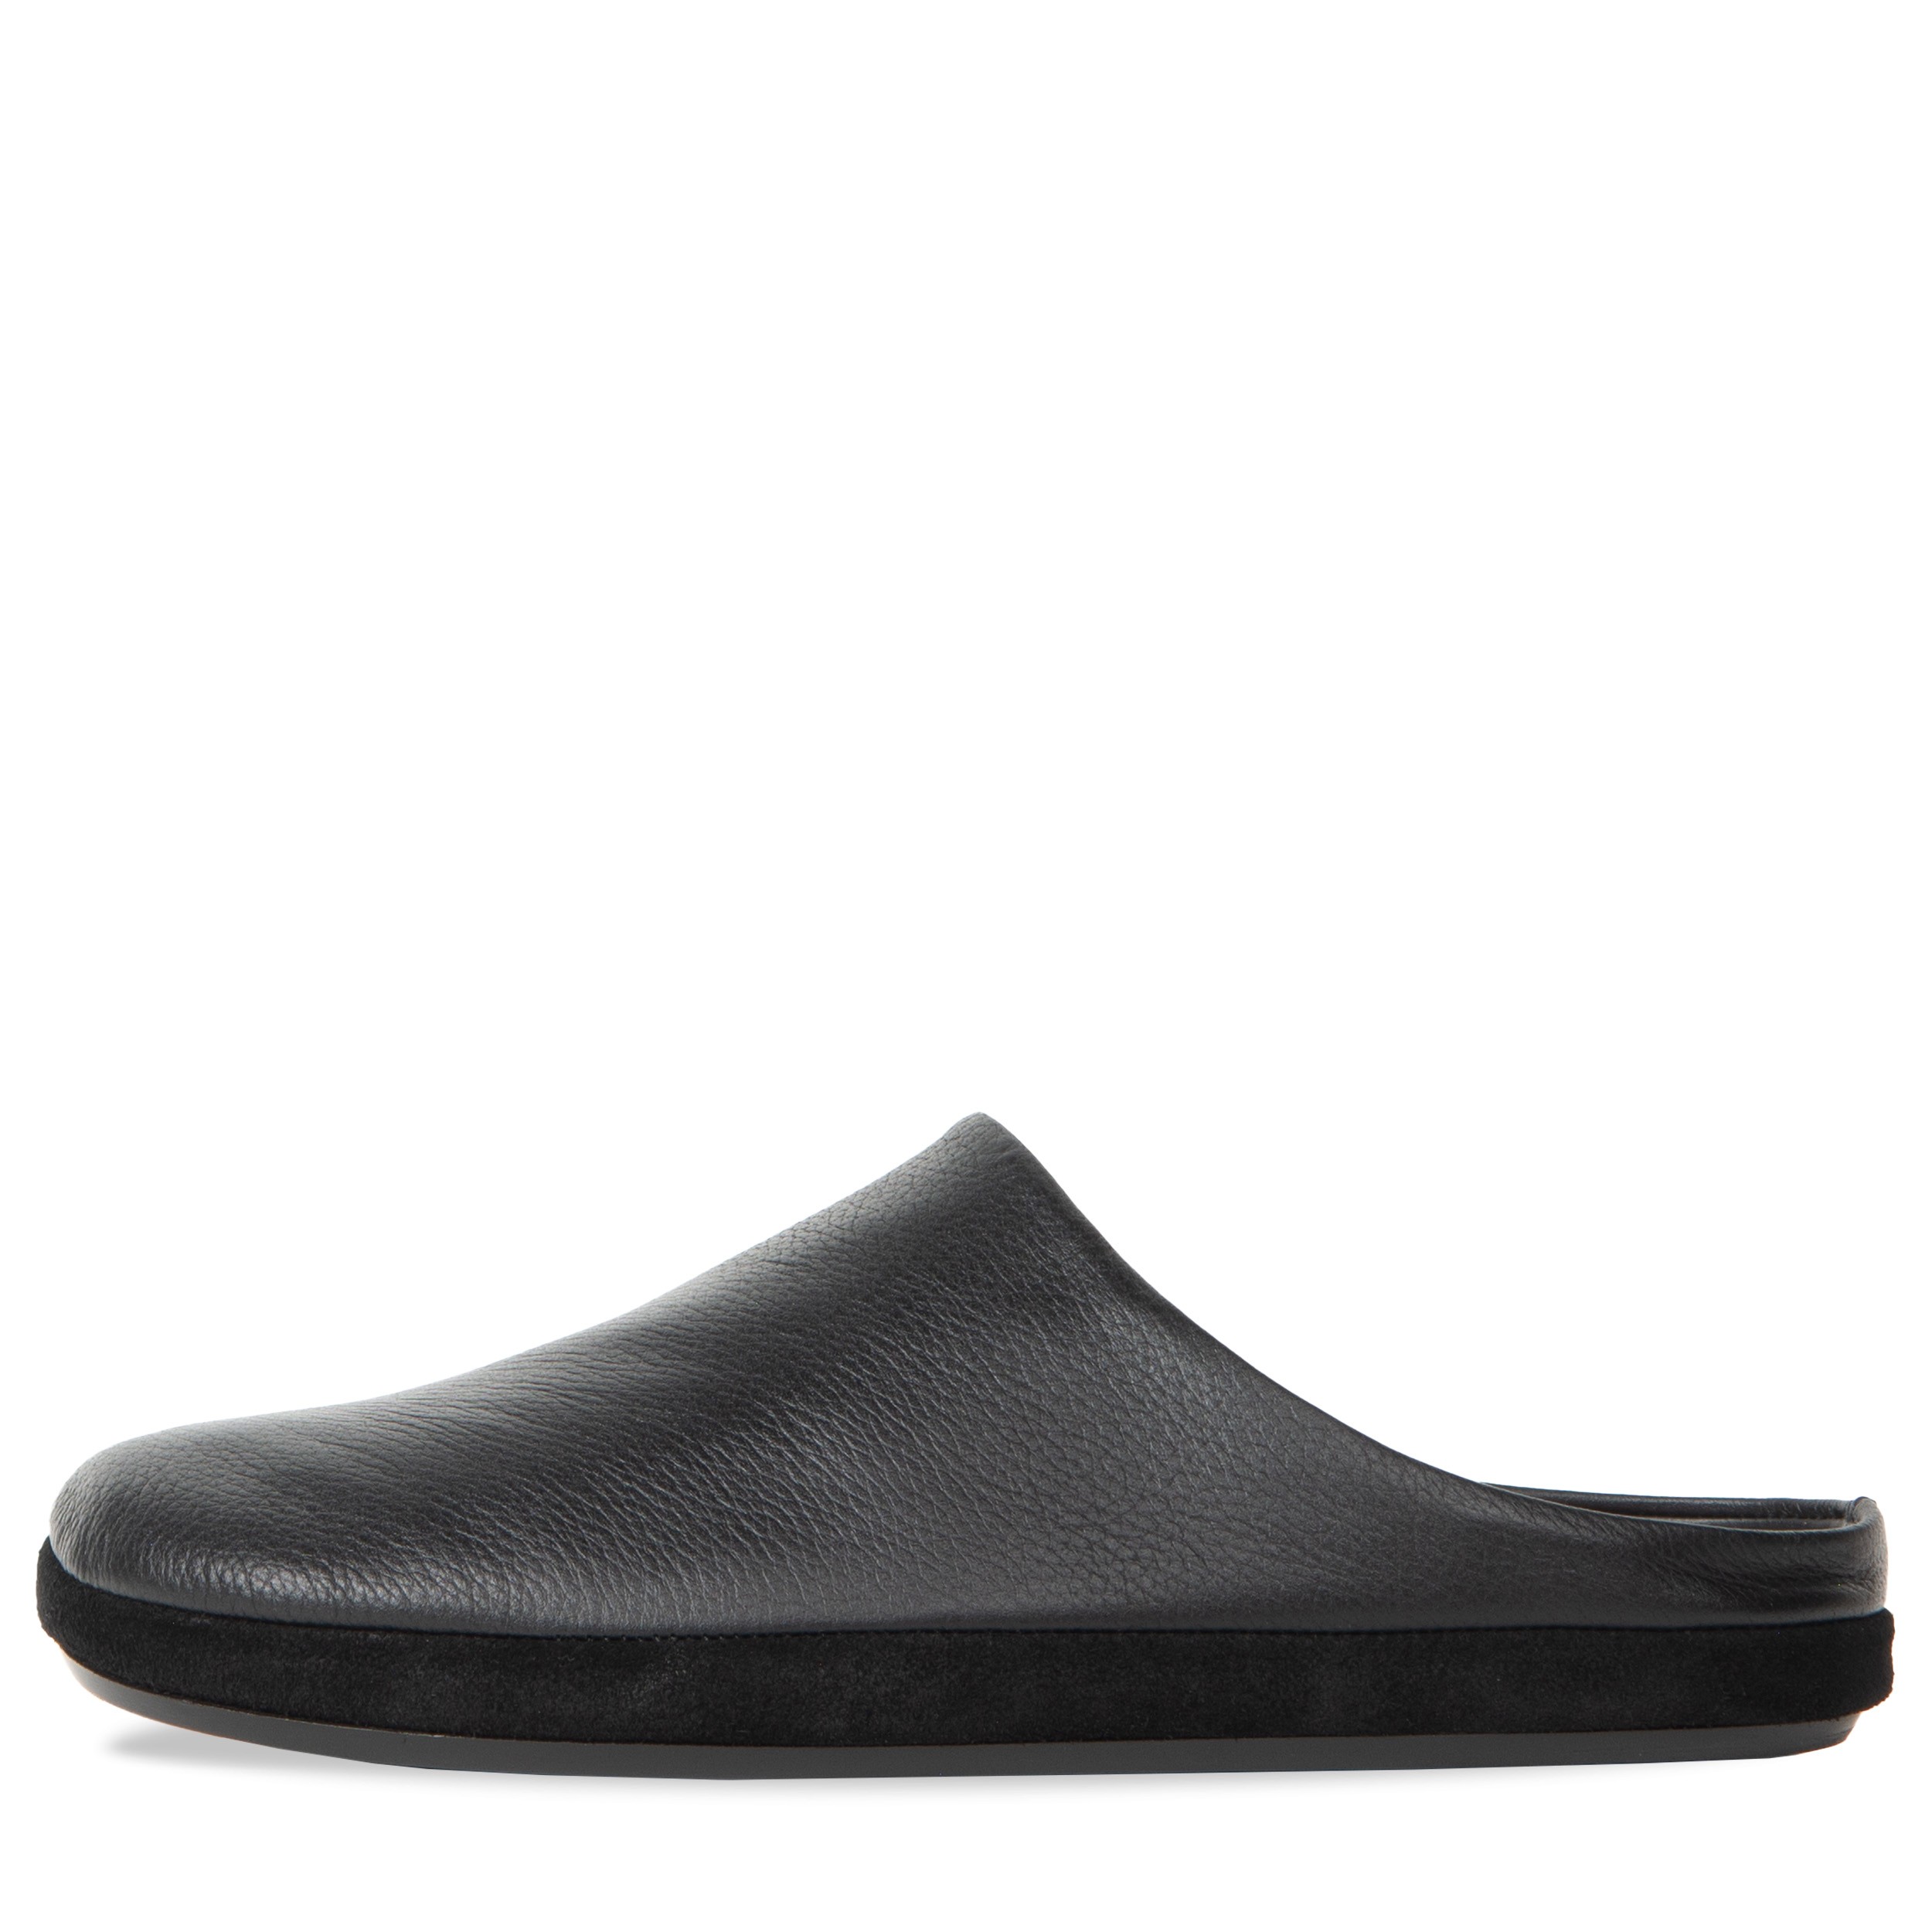 Paul Smith Noah Grained Leather Slippers Black